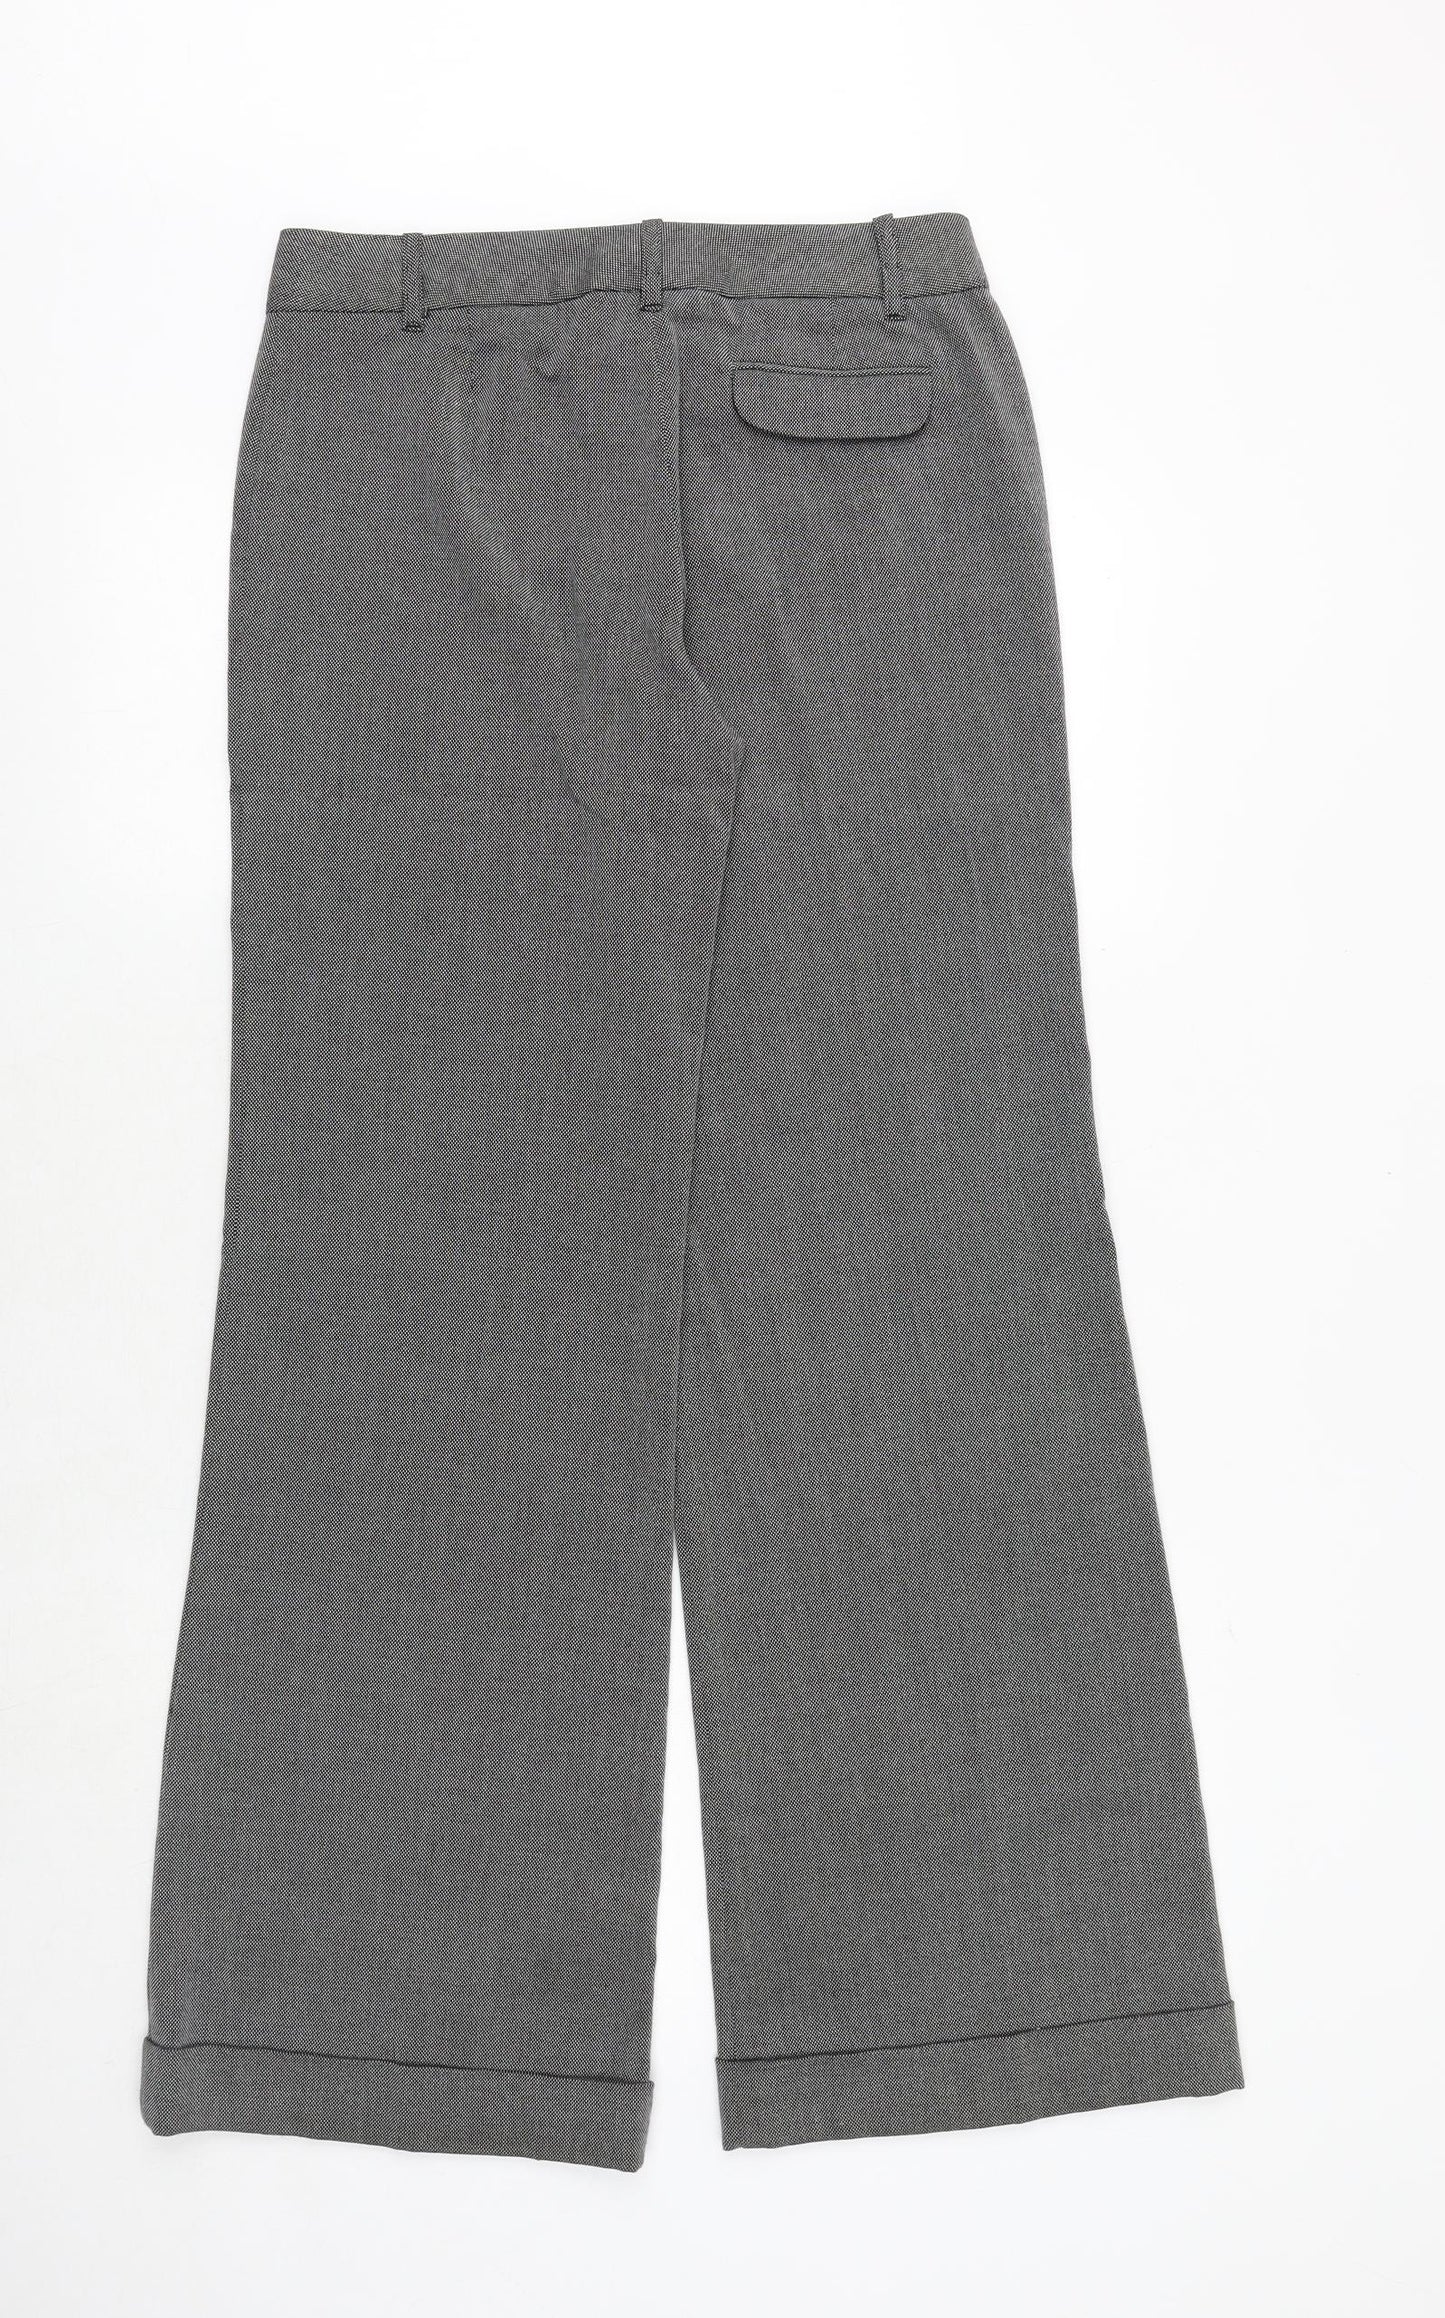 Oasis Womens Grey Polyester Trousers Size 10 Regular Zip